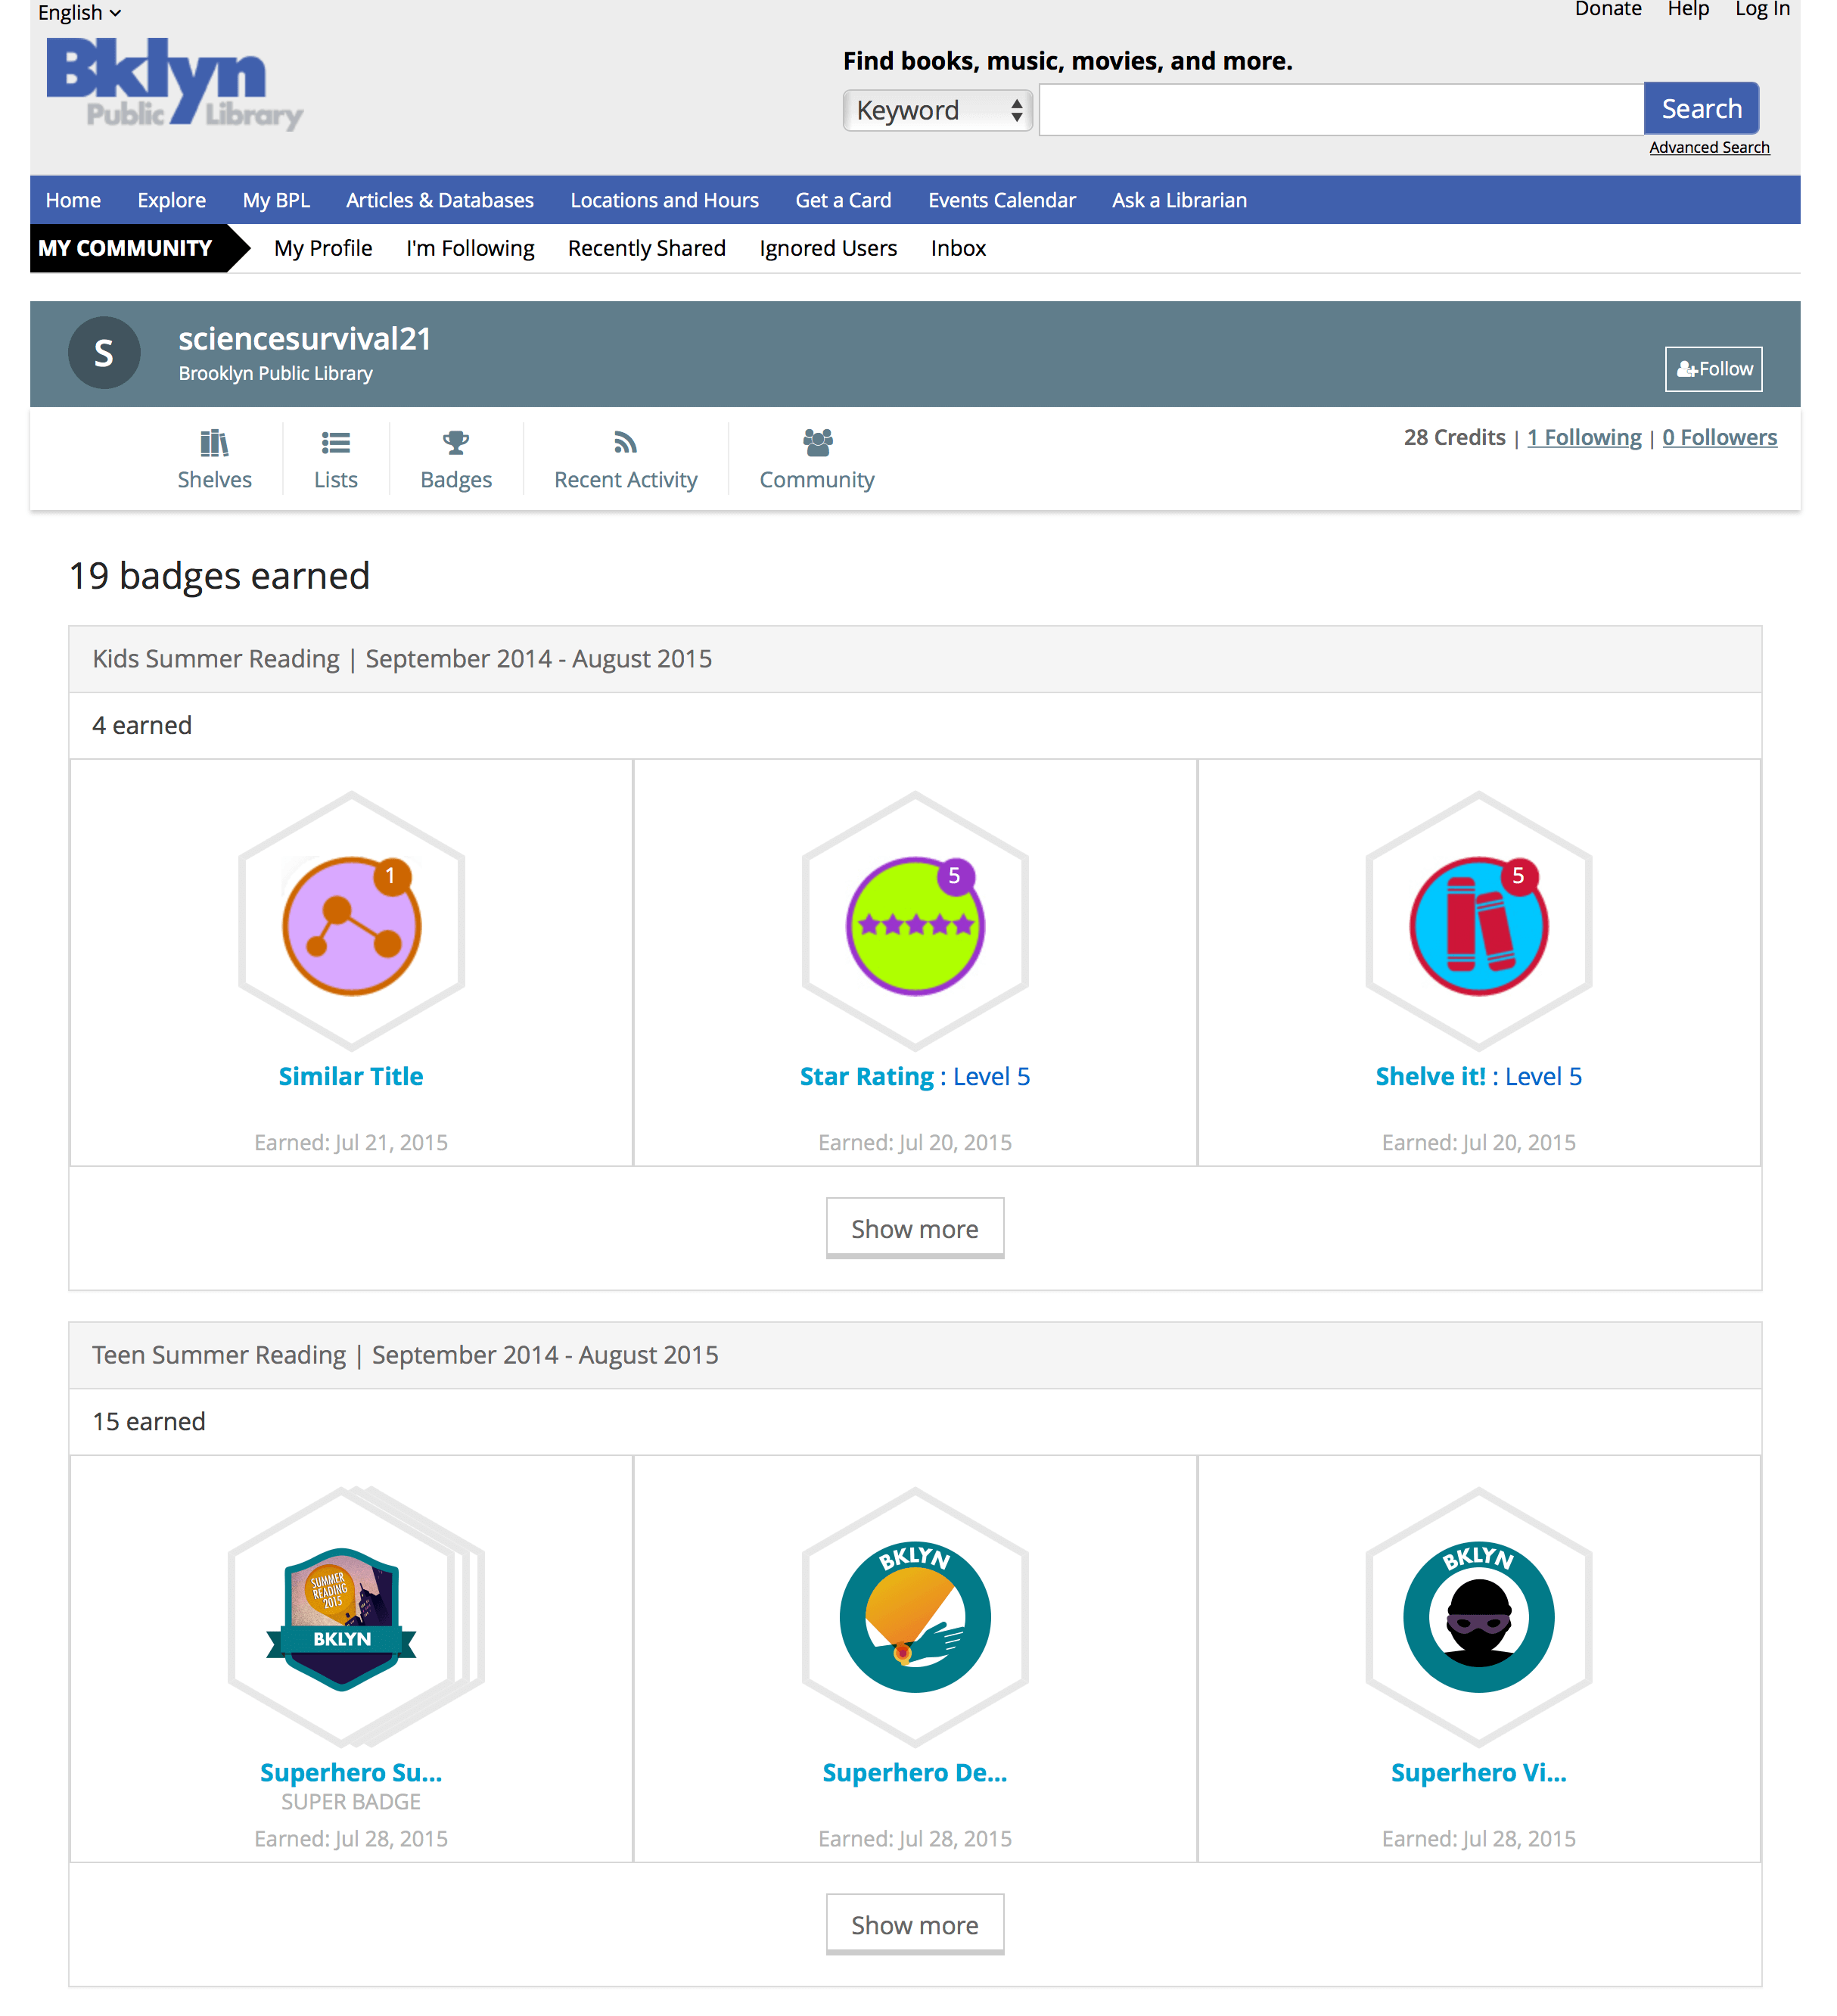 Badges across the user's library life